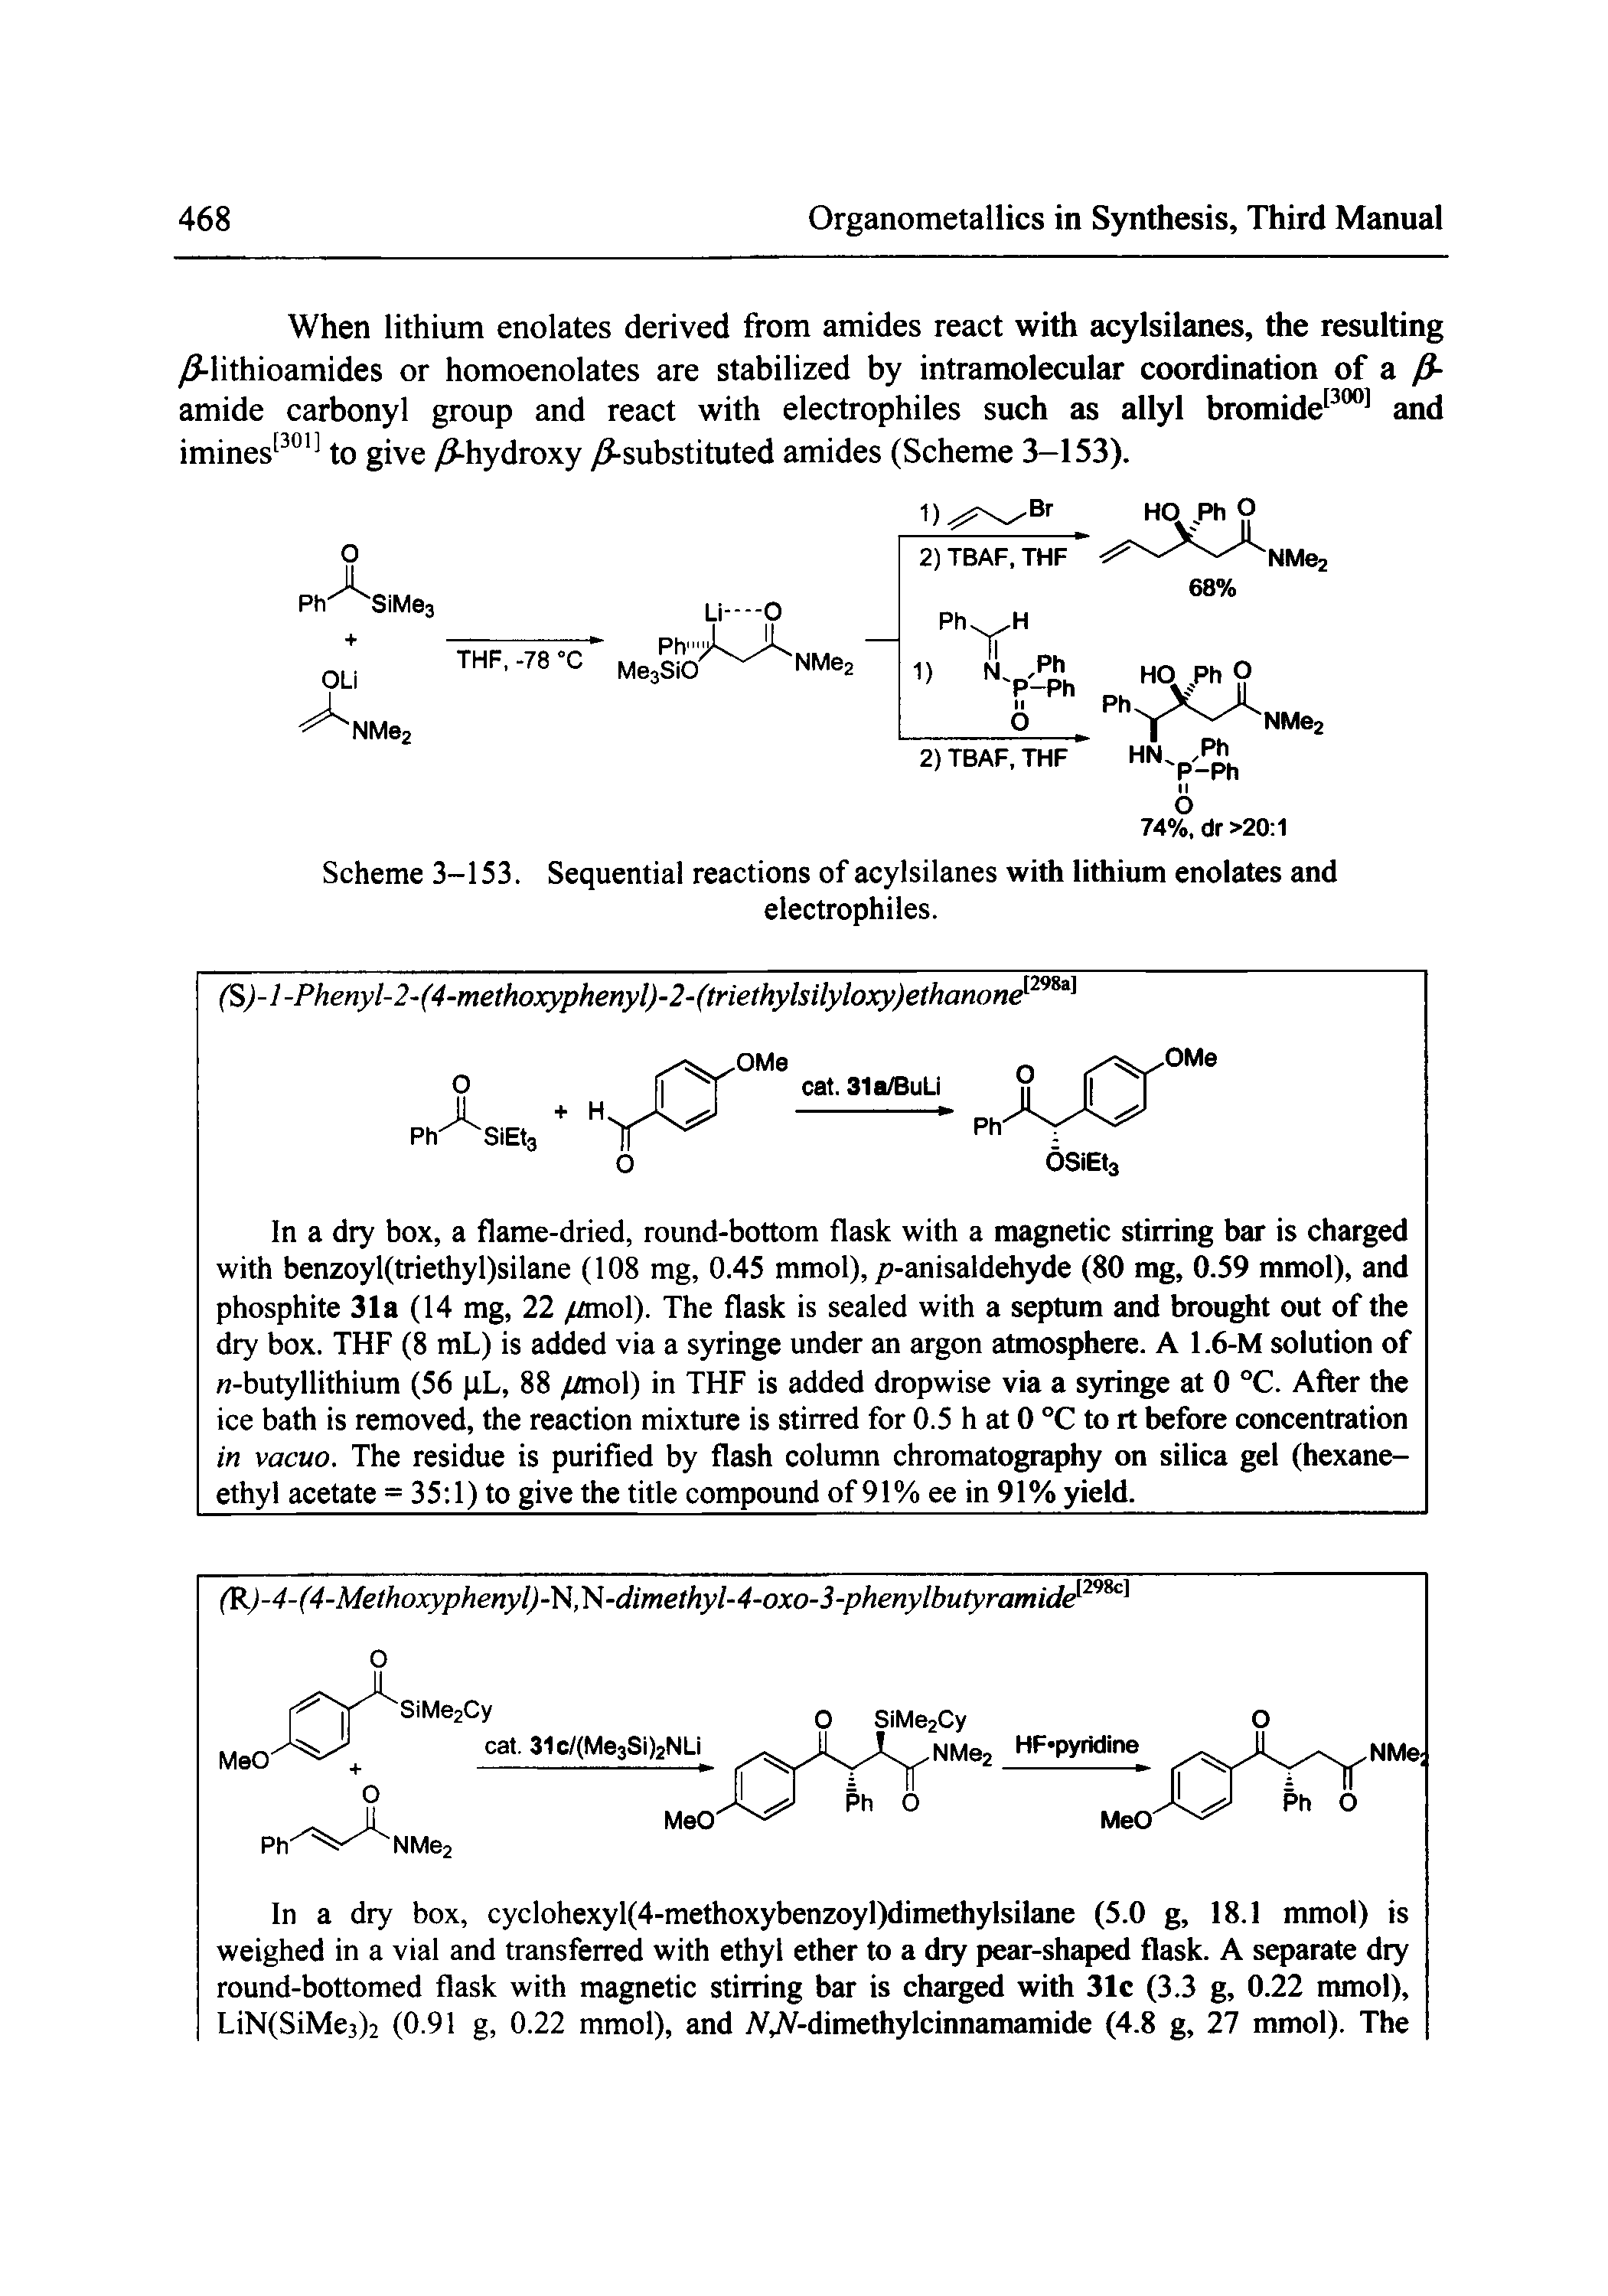 Scheme 3-153. Sequential reactions of acylsilanes with lithium enolates and...